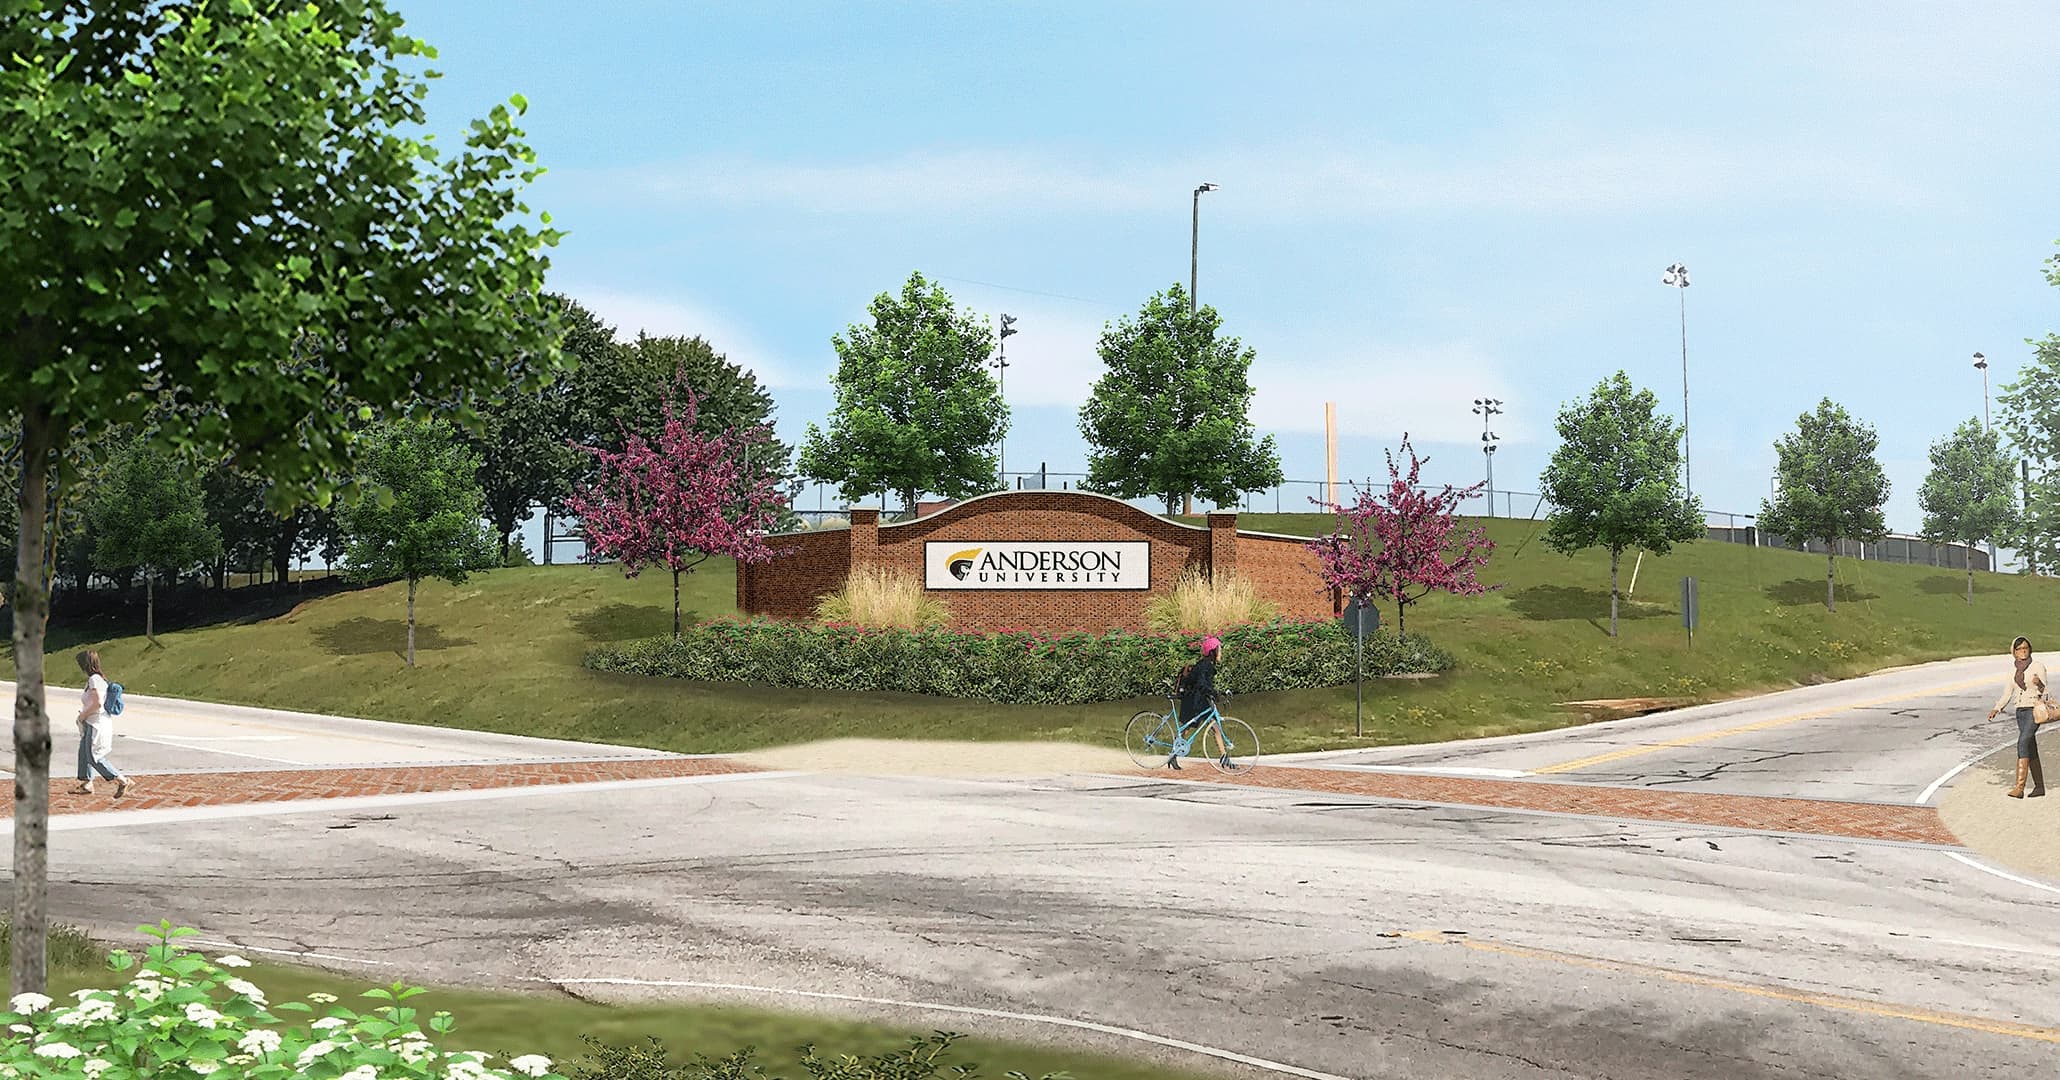 Boudreaux architects and master planners designed a new Athletics gateway.